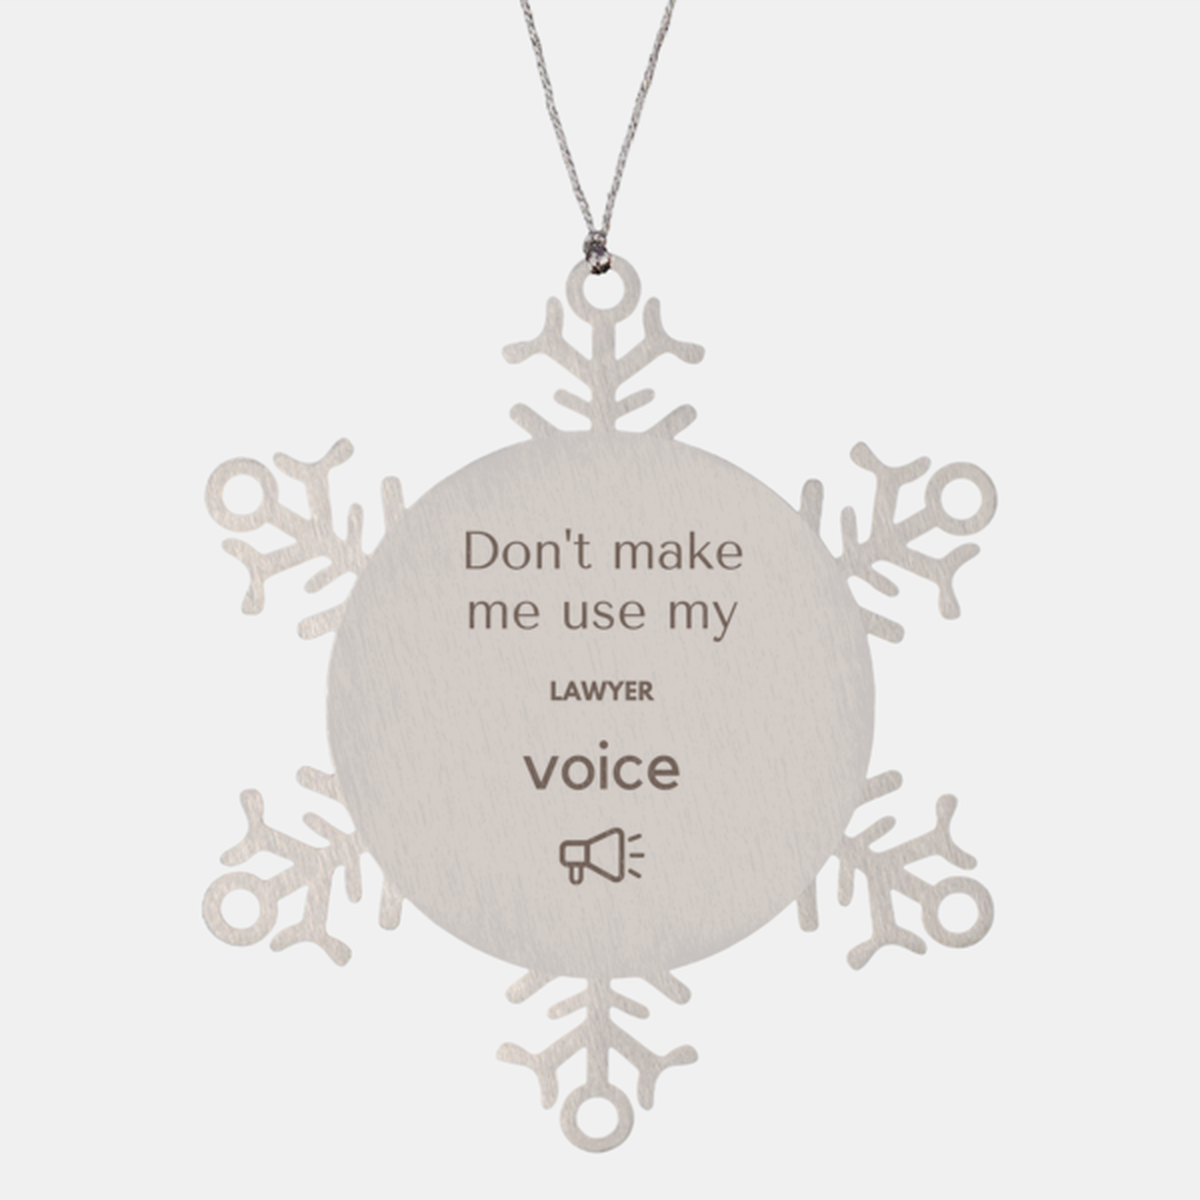 Don't make me use my Lawyer voice, Sarcasm Lawyer Ornament Gifts, Christmas Lawyer Snowflake Ornament Unique Gifts For Lawyer Coworkers, Men, Women, Colleague, Friends